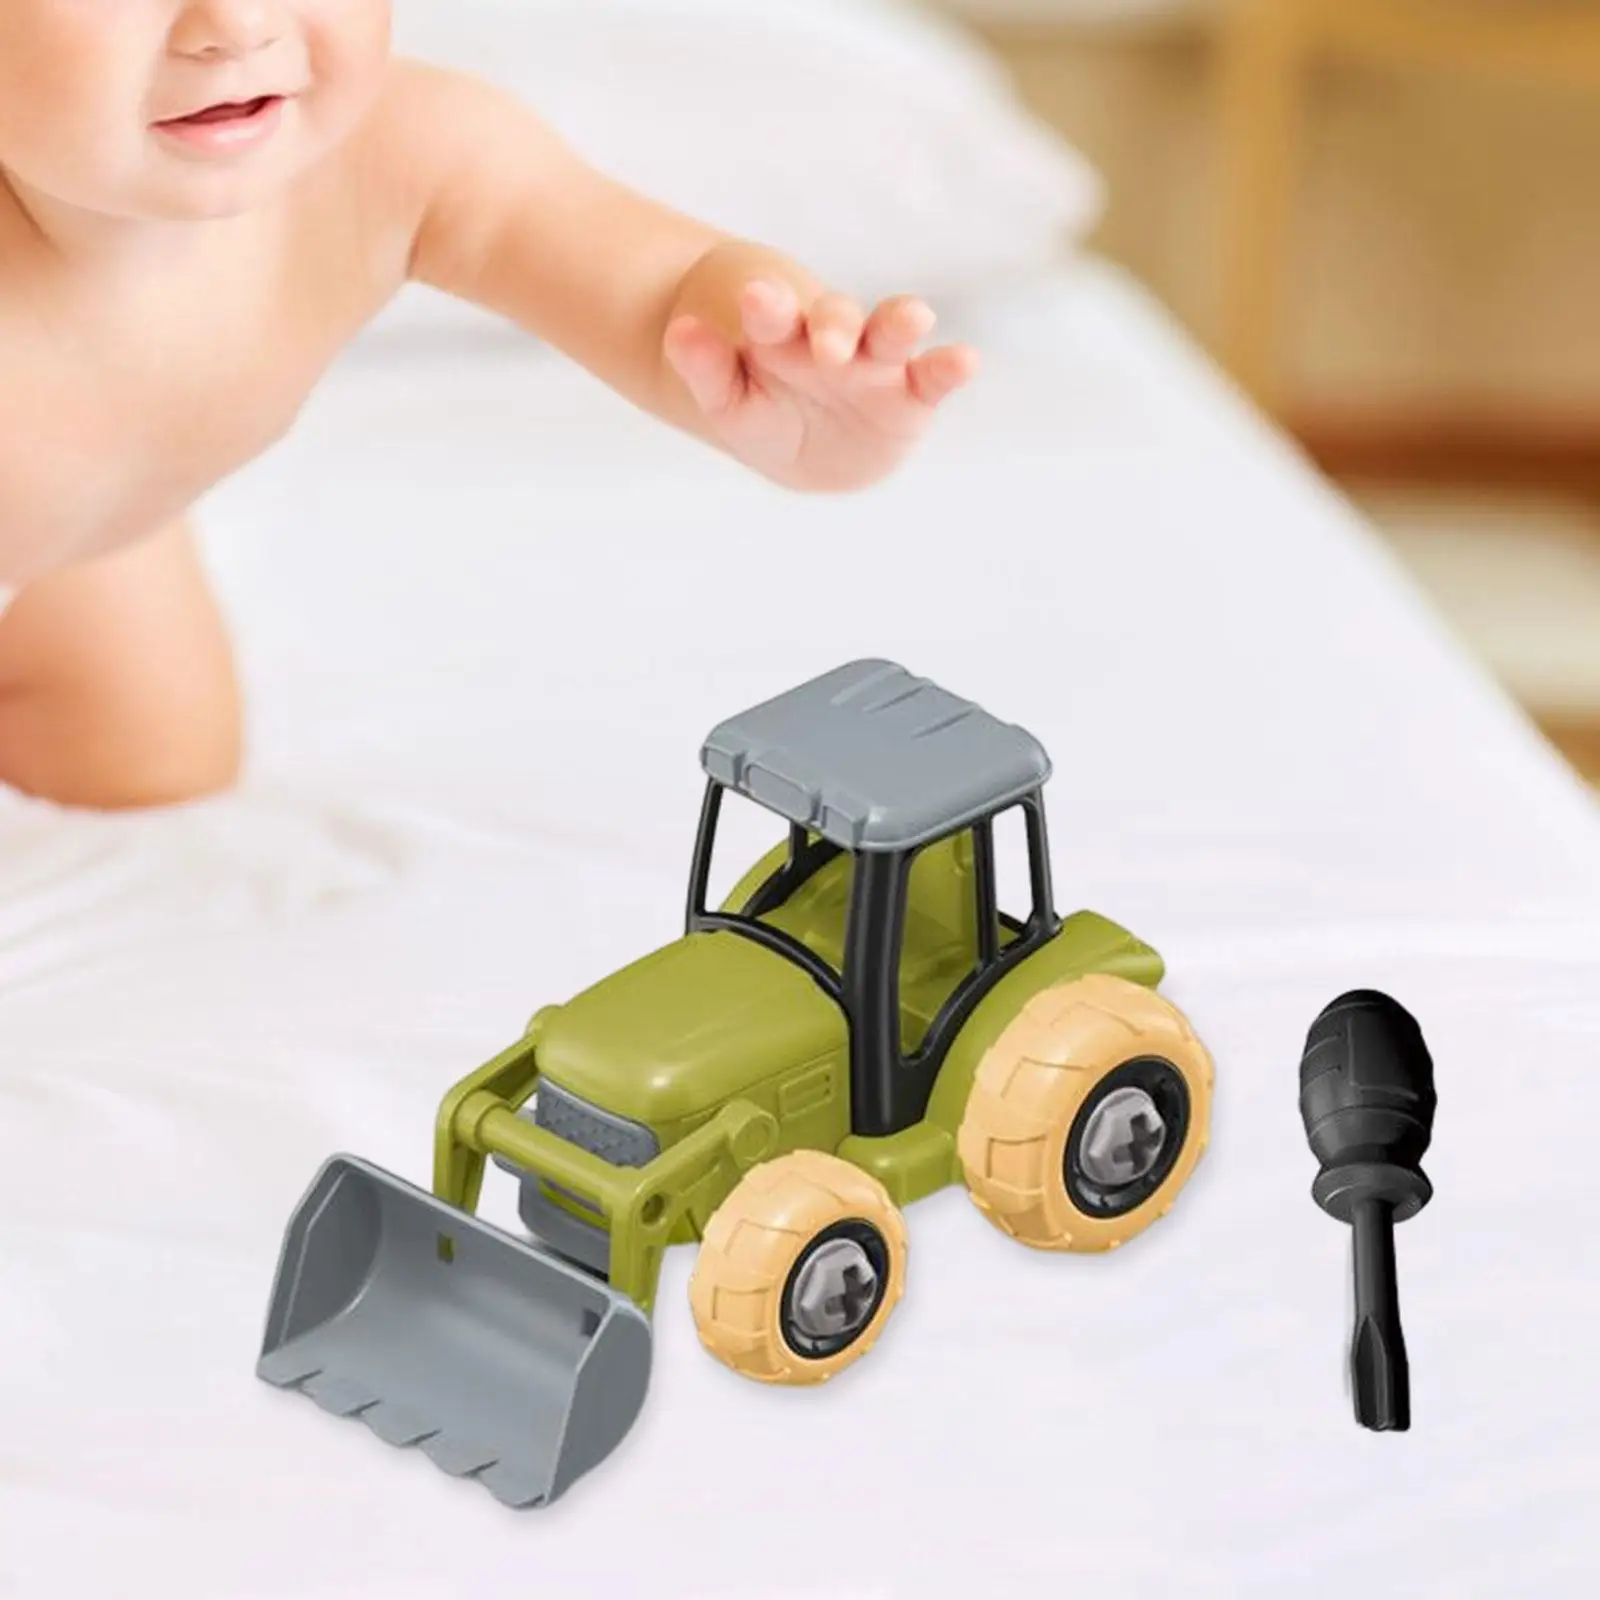 Take Apart Toy Excavator Truck W/ Screwdriver Construction Vehicles Building Excavator Toy for 3 4 5 6 7 Year Old Birthday Gifts